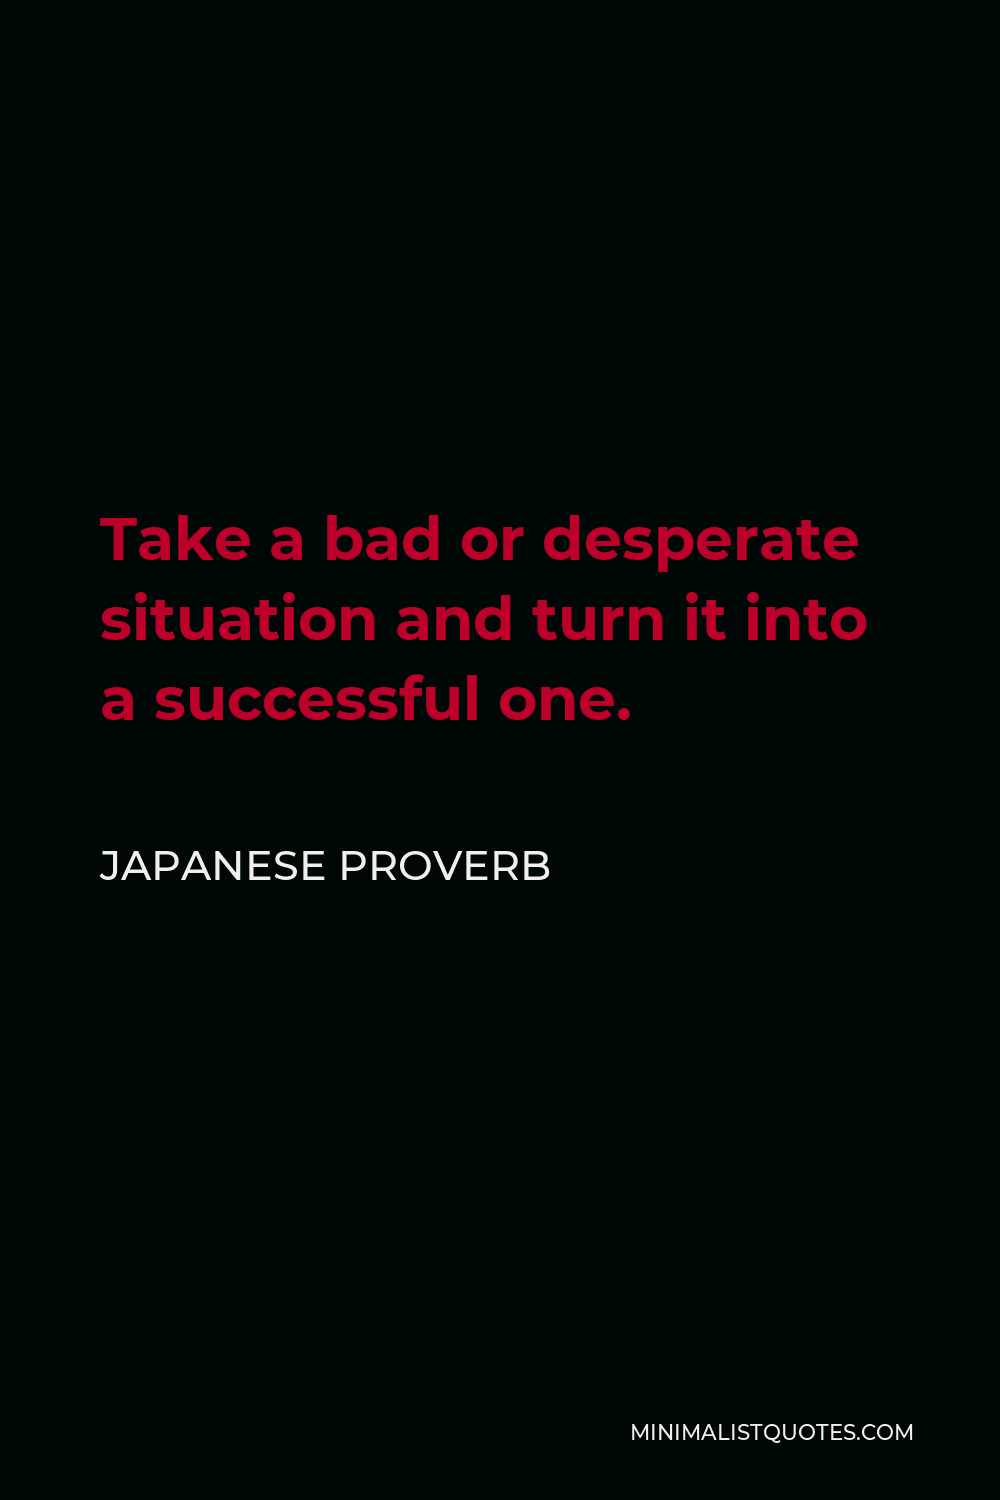 Japanese Proverb Quote - Take a bad or desperate situation and turn it into a successful one.